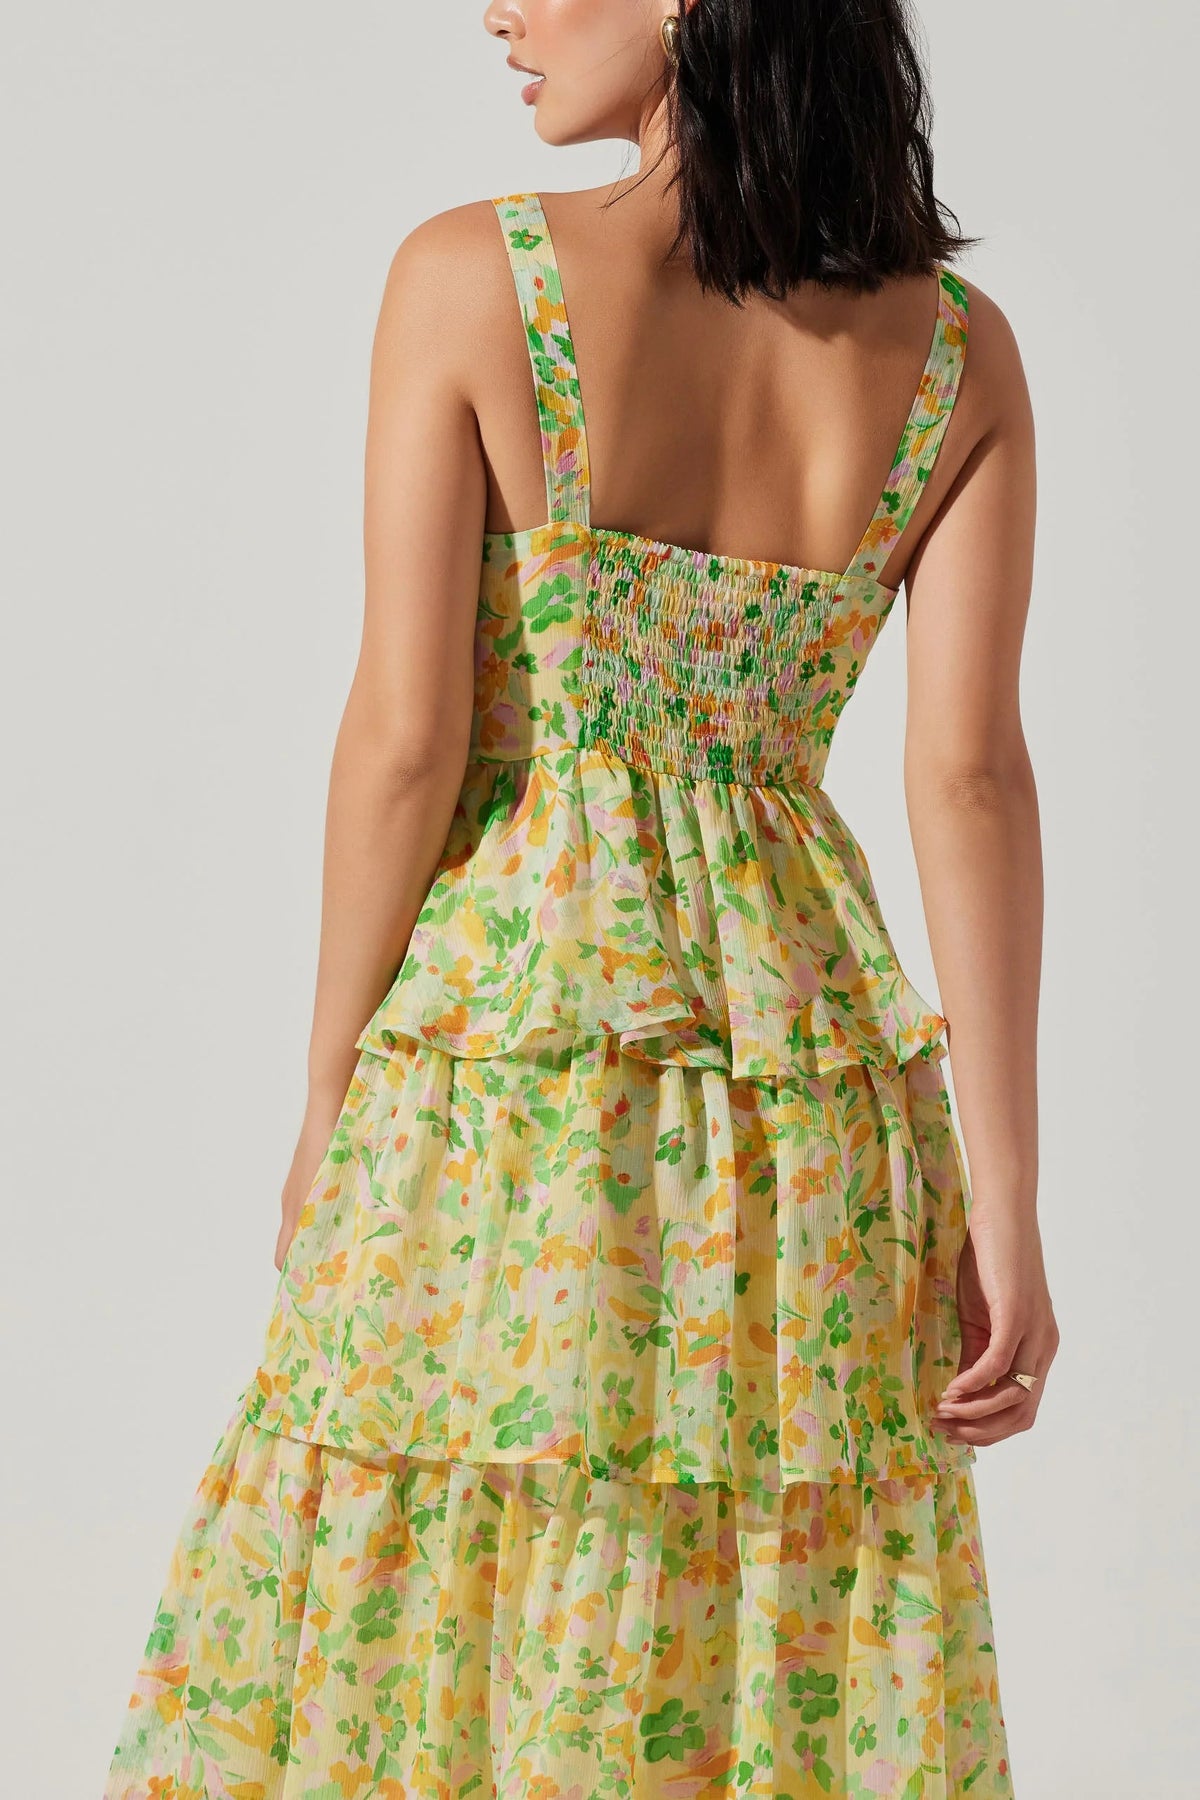 bright yellow and green floral maxi dress 